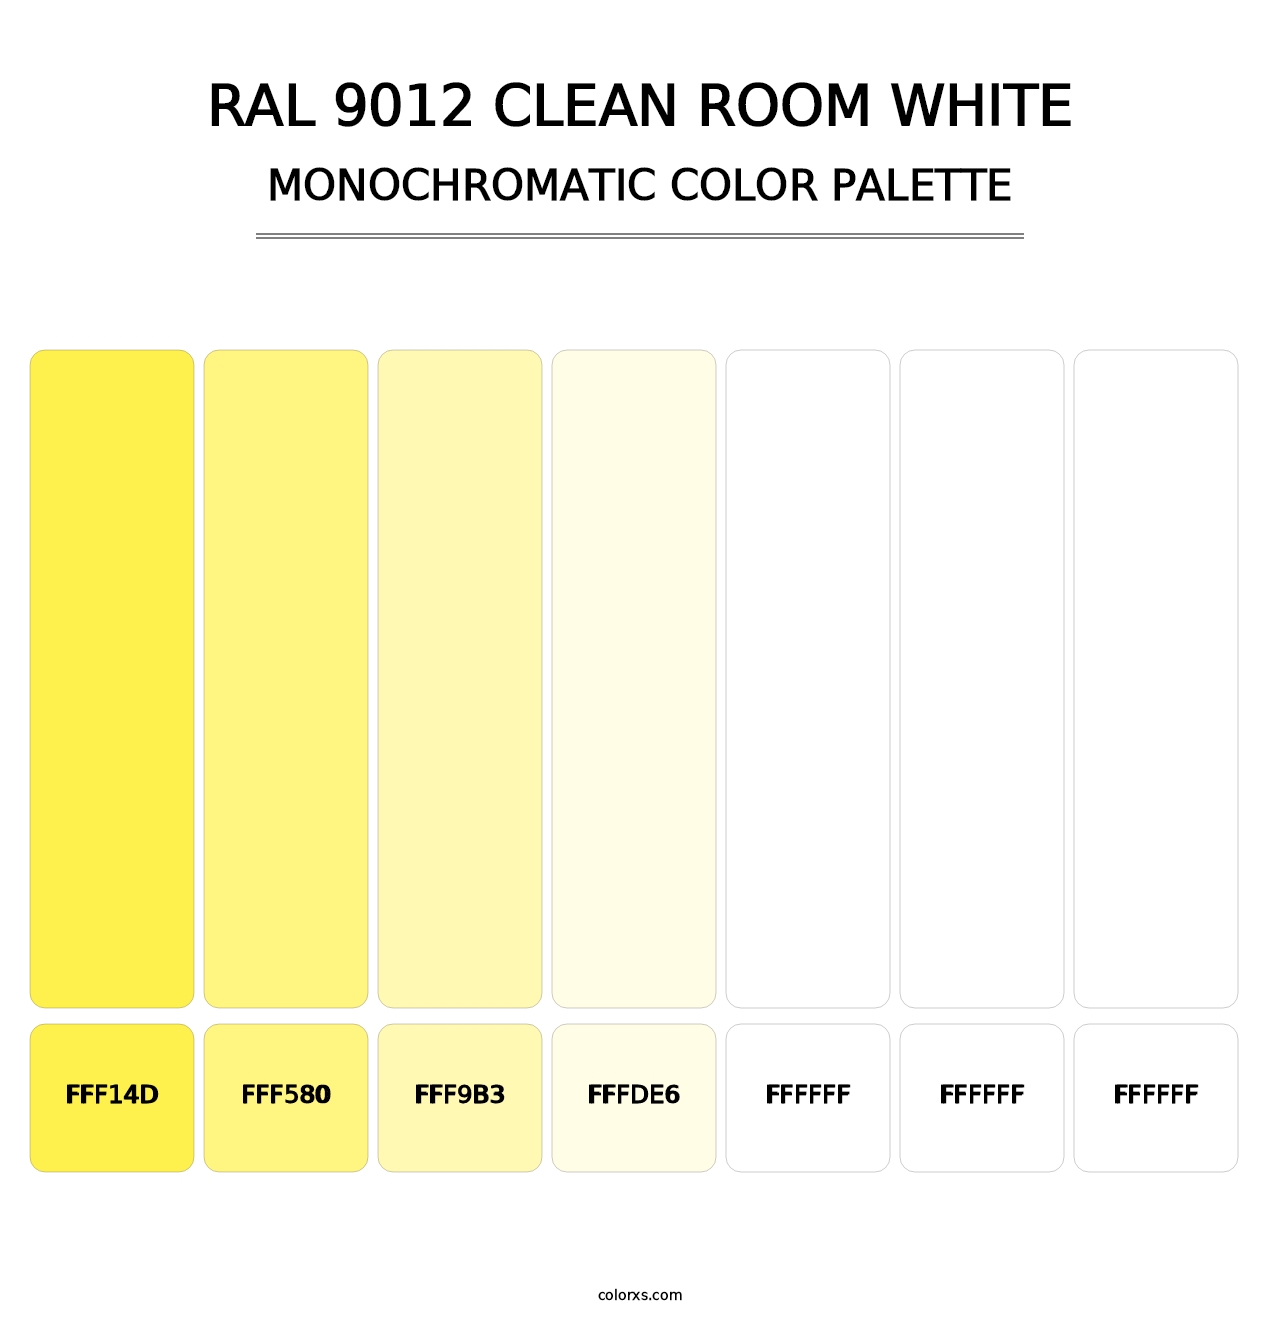 RAL 9012 Clean Room White - Monochromatic Color Palette